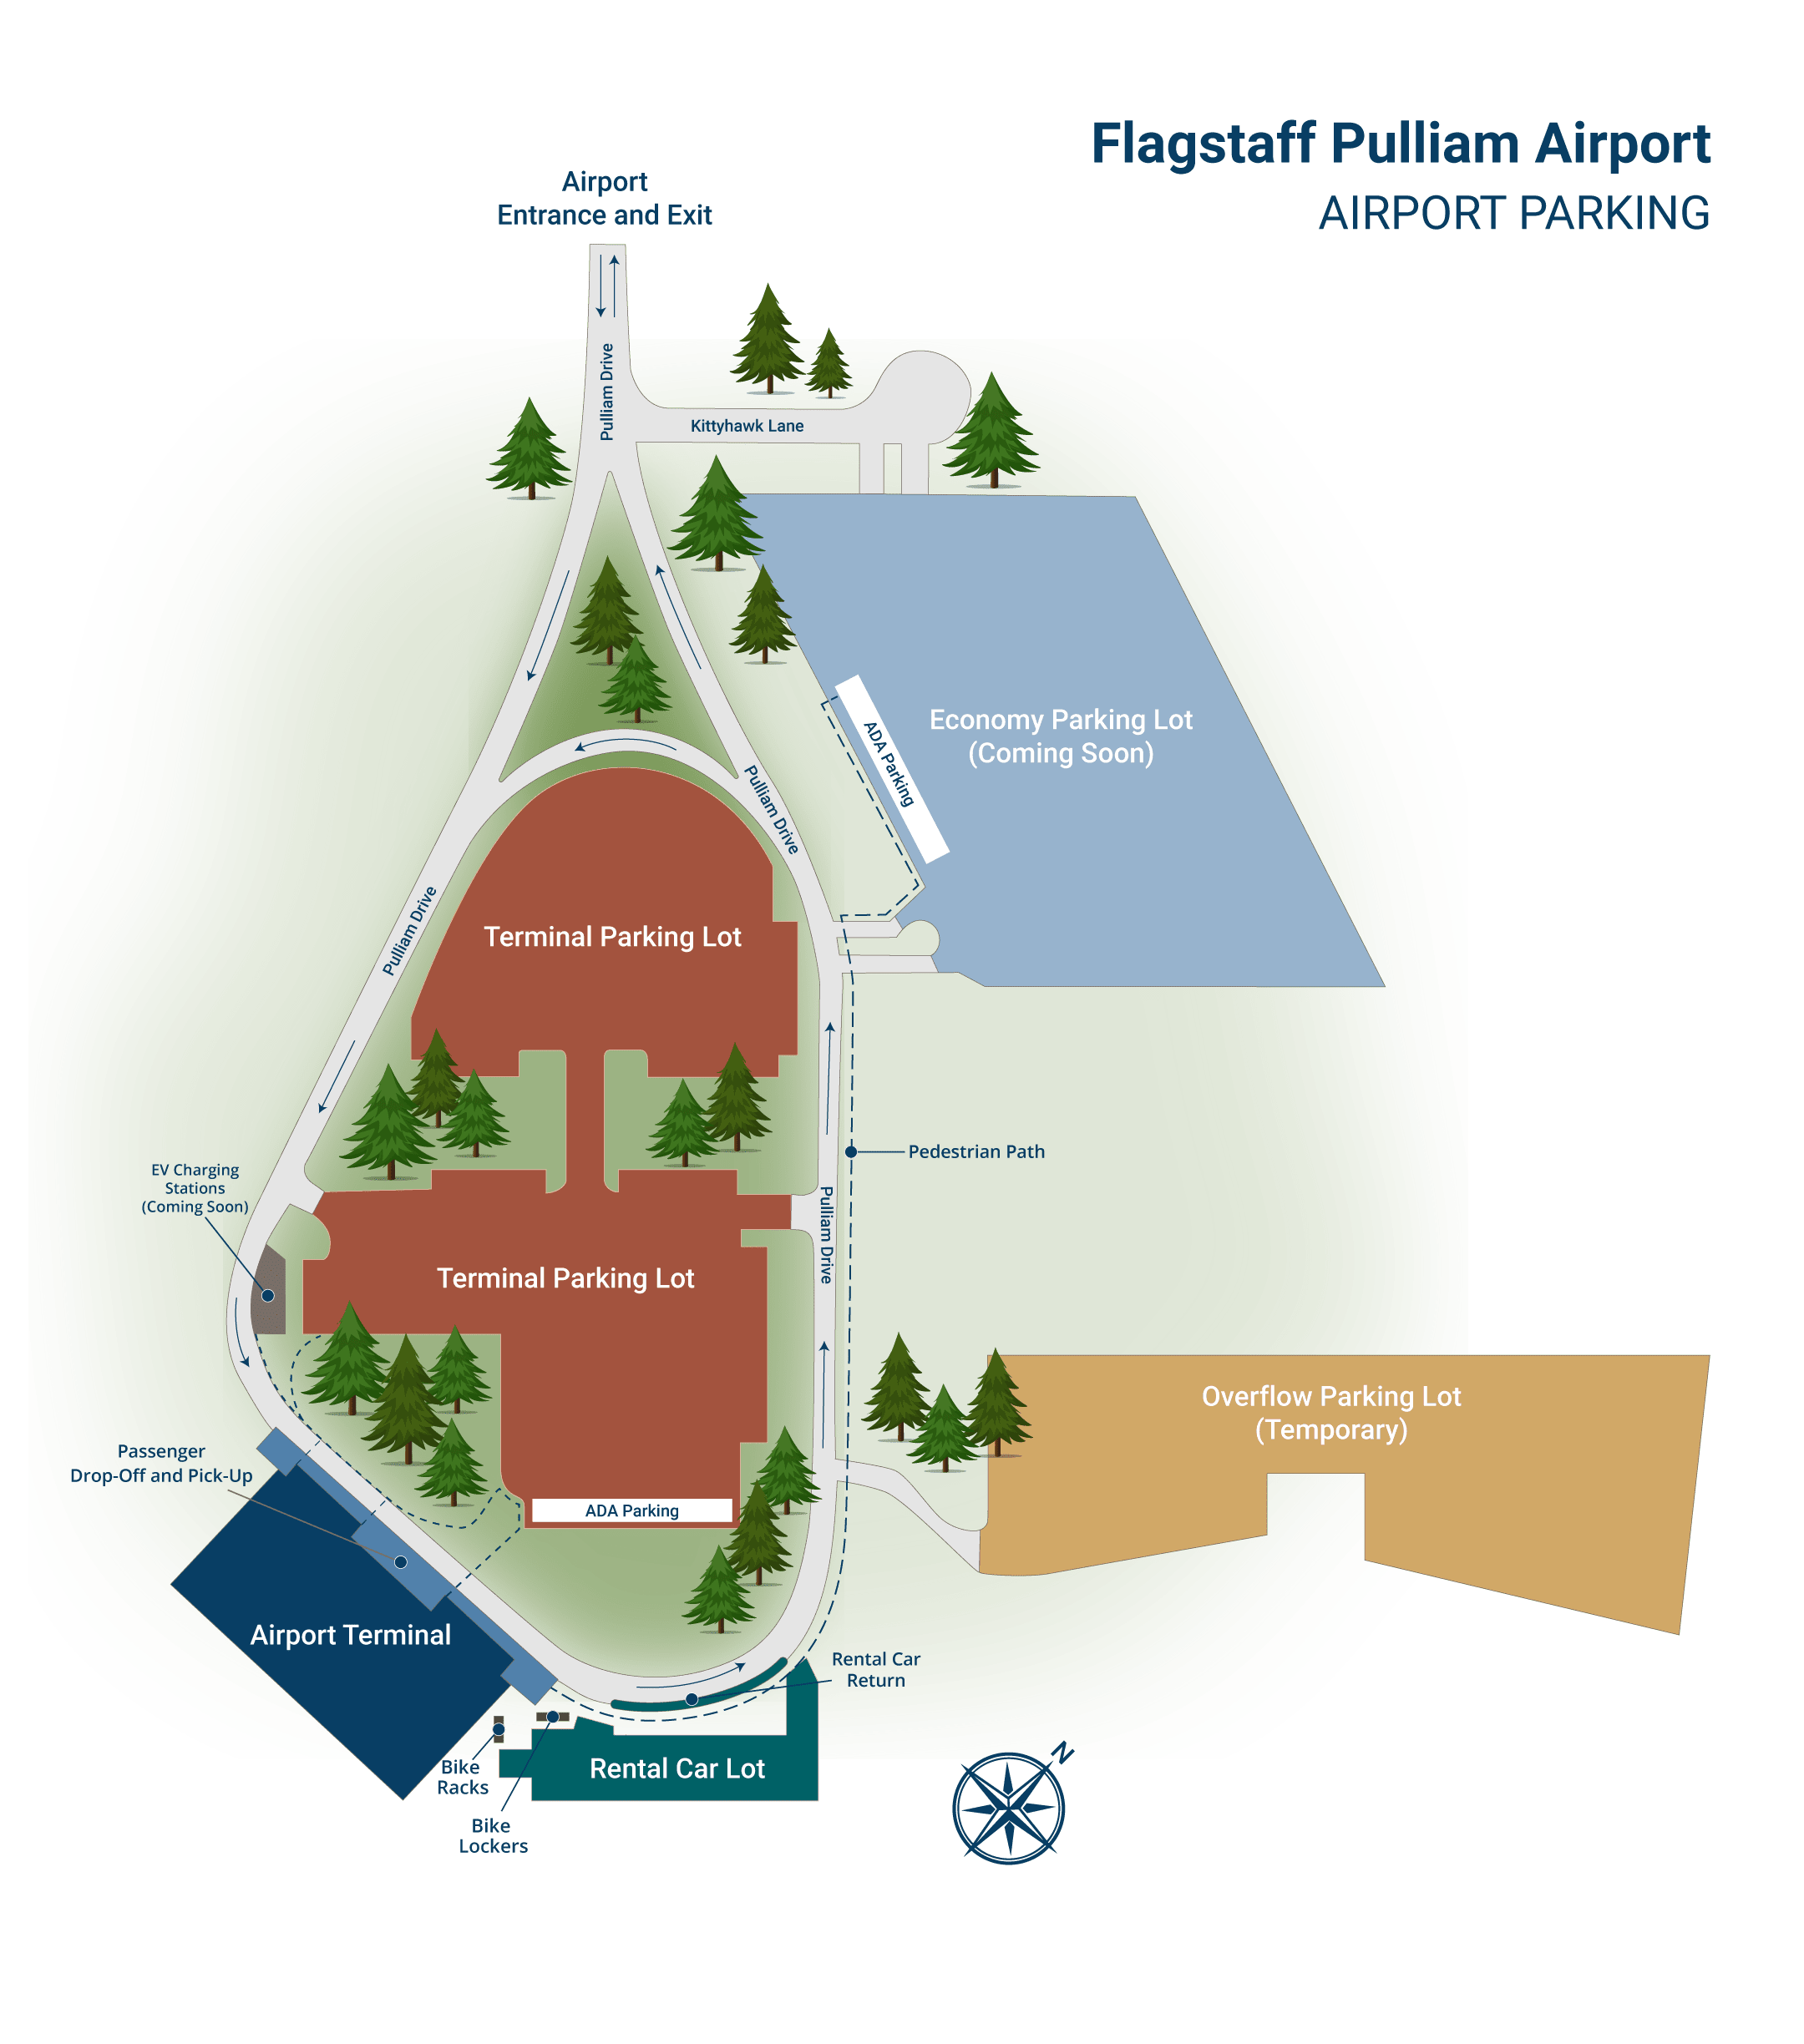 Map showing parking lots at FLG Airport